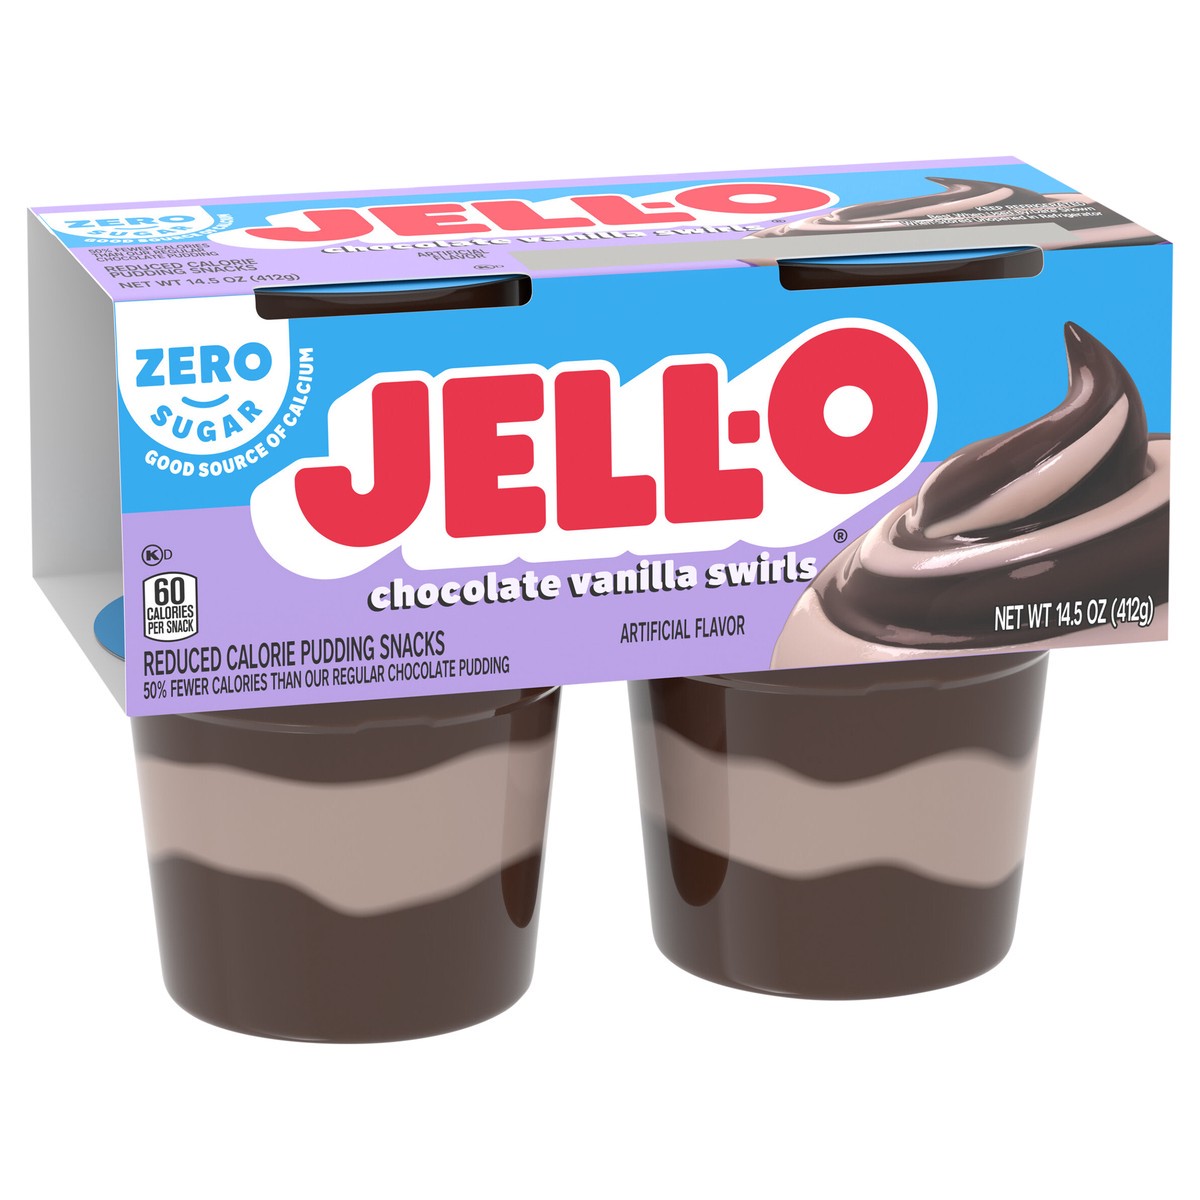 slide 3 of 9, Jell-O Chocolate Vanilla Swirls Artificially Flavored Zero Sugar Ready-to-Eat Pudding Snack Cups, 4 ct Cups, 4 ct